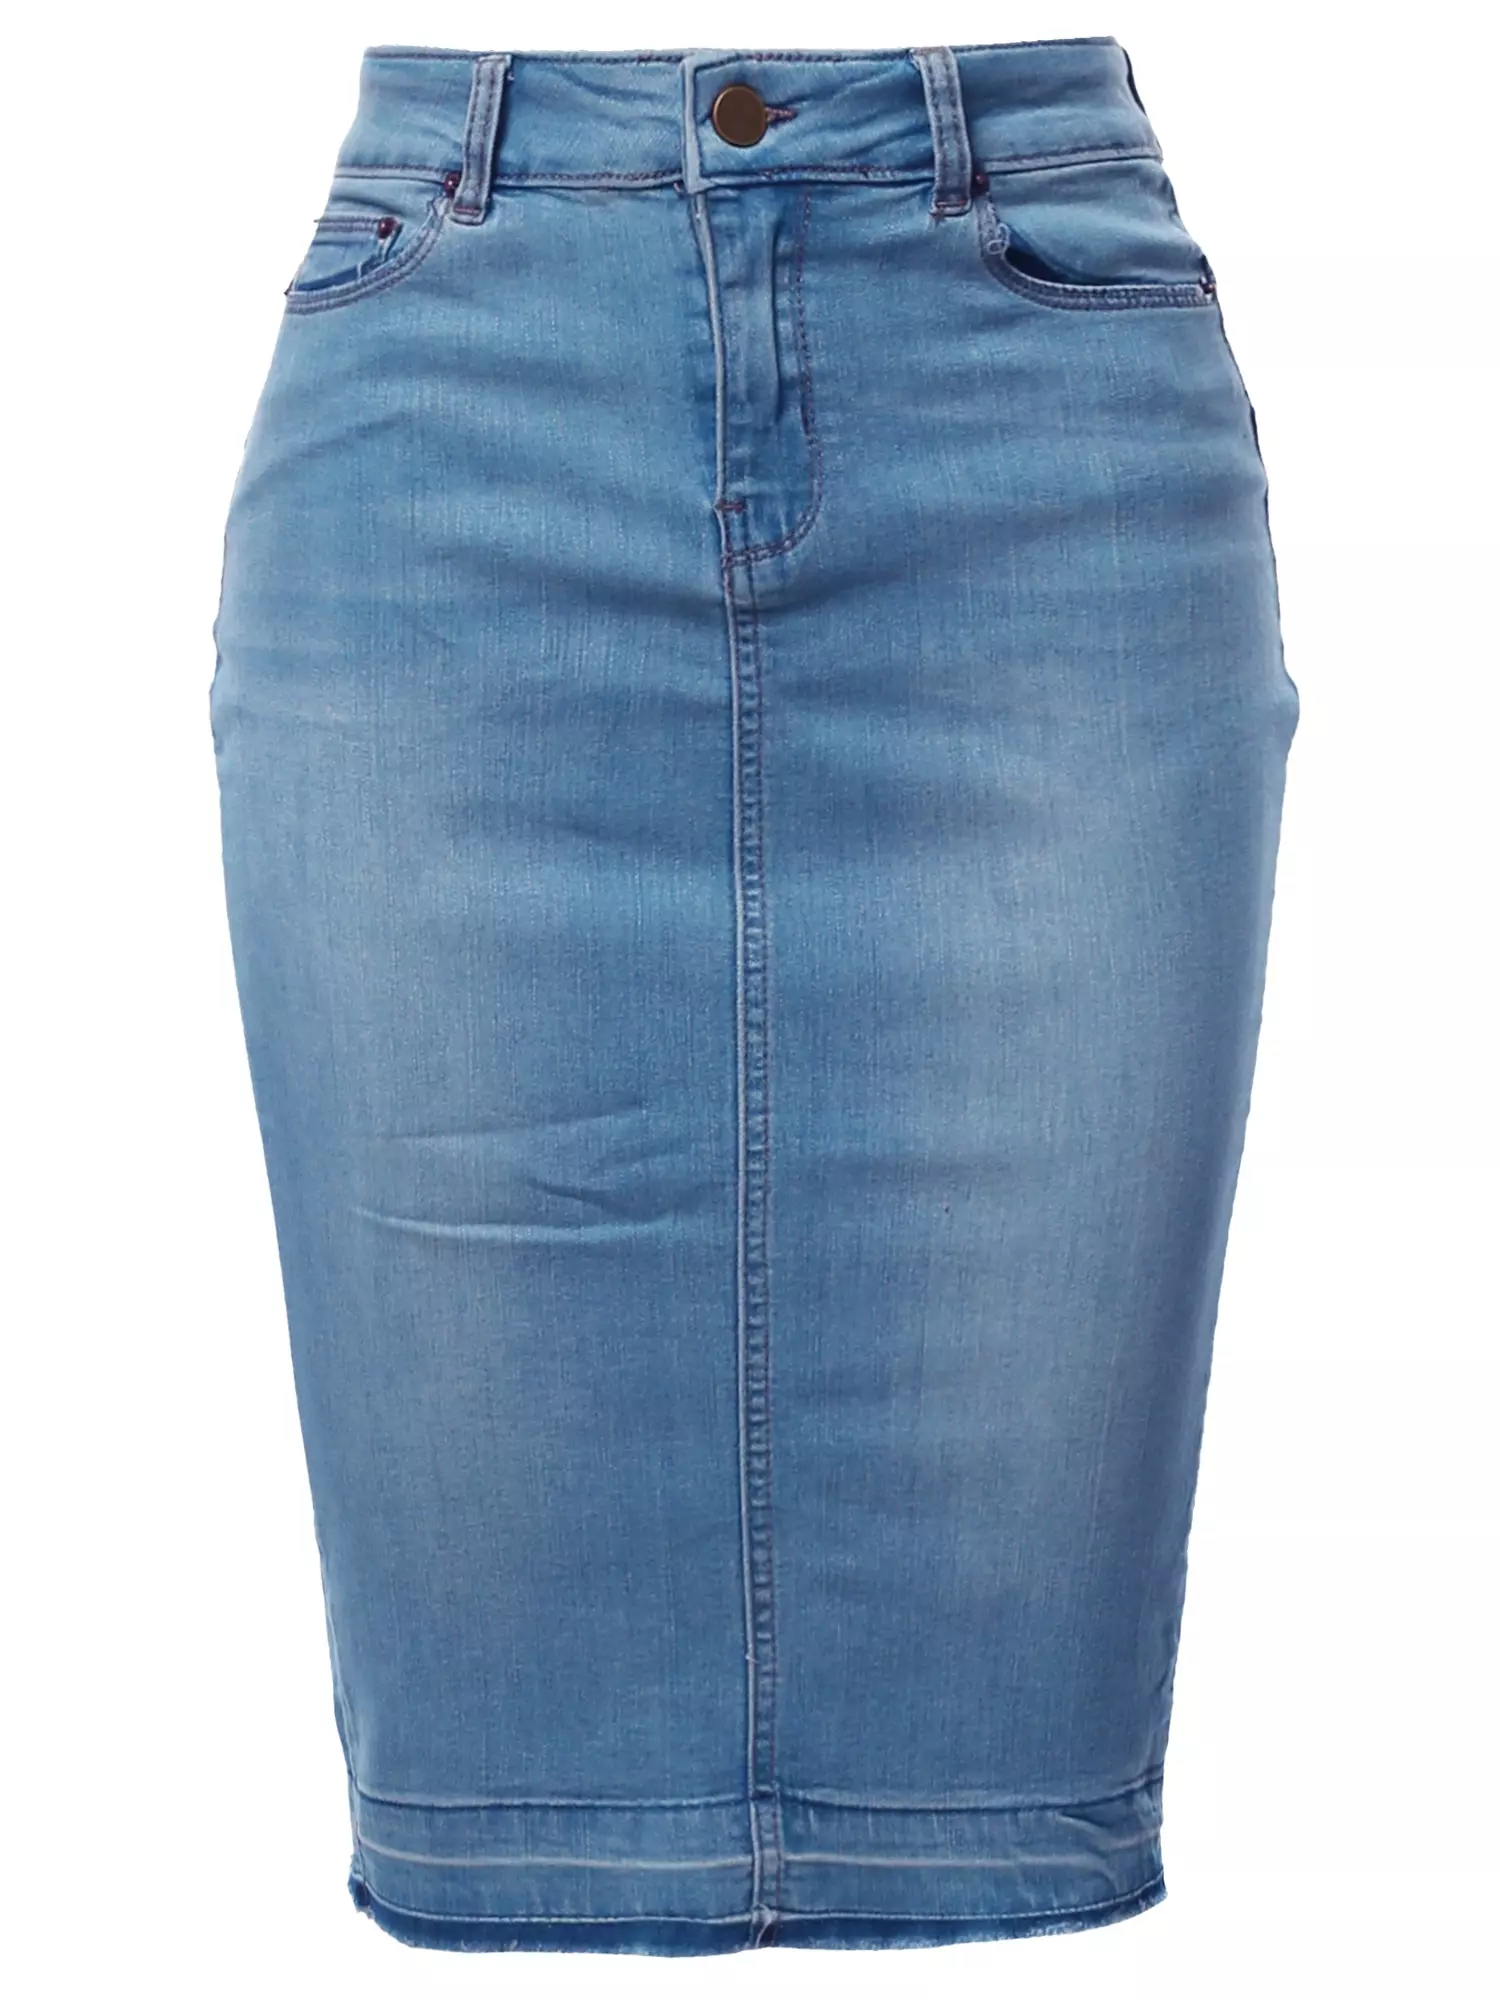 11 Best Denim Skirts For Work And The Weekend In 2023